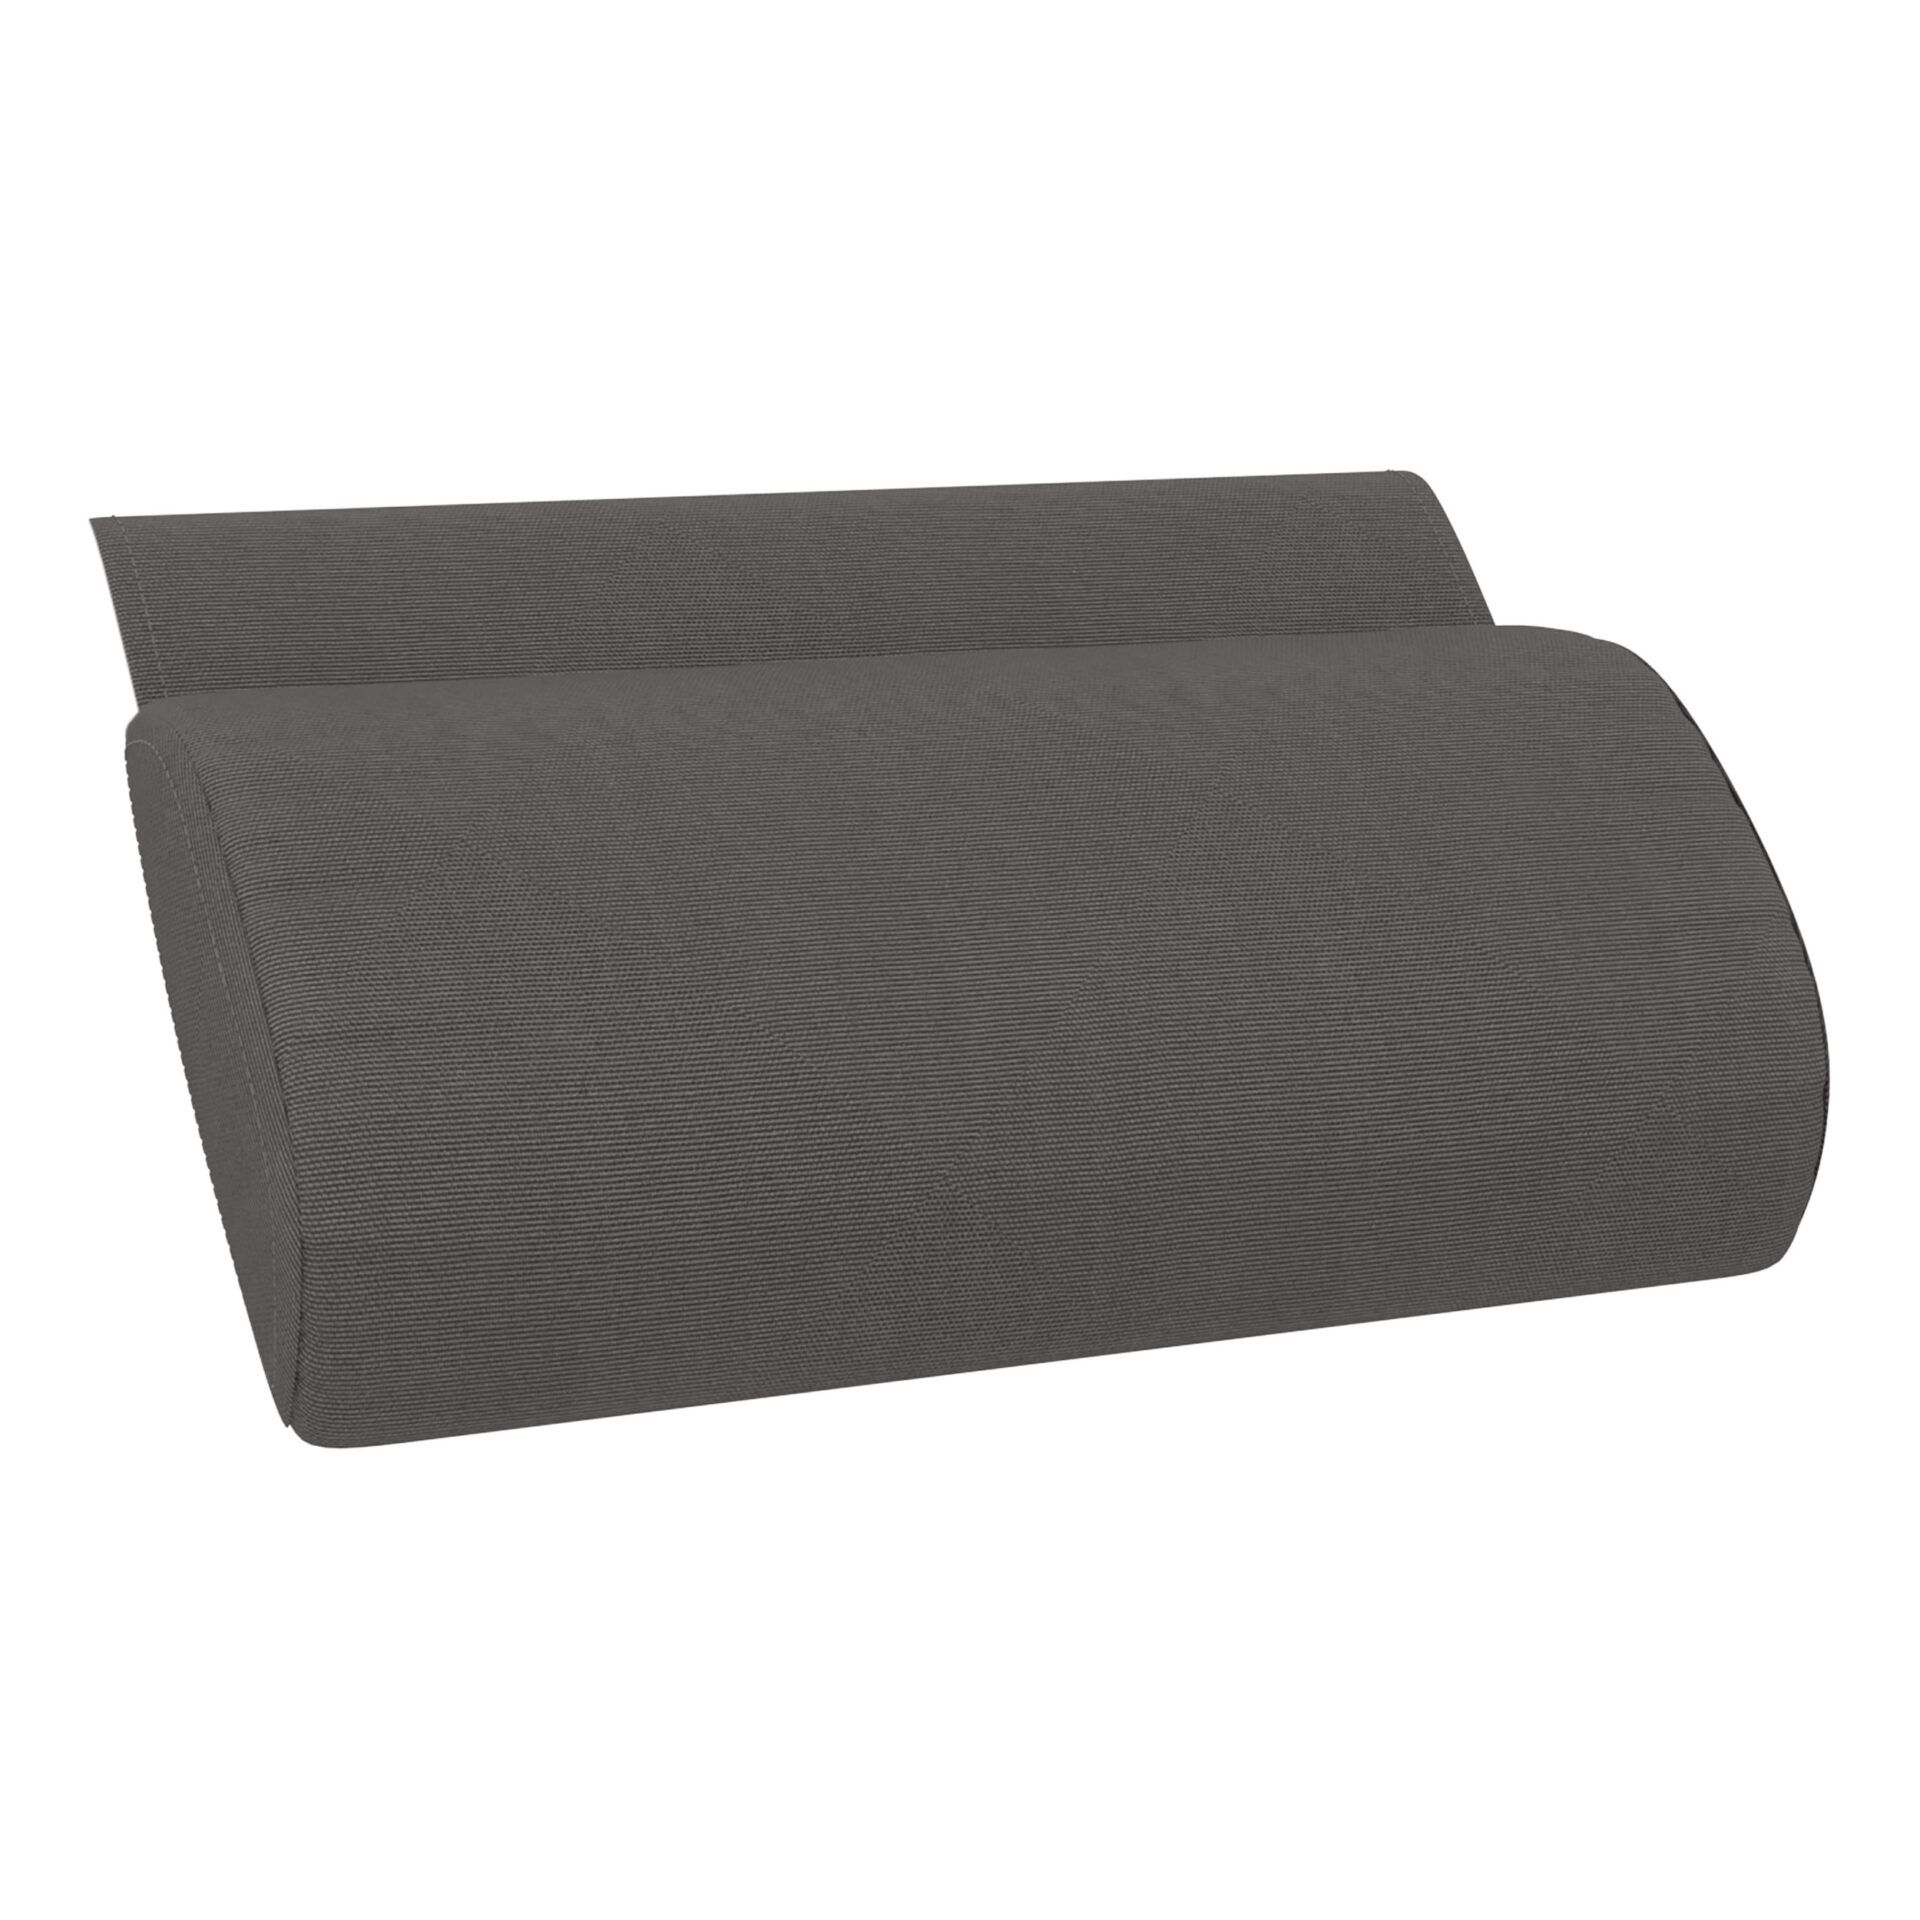 Cushion Pillow Anthracite - (Slim Sunlounger)